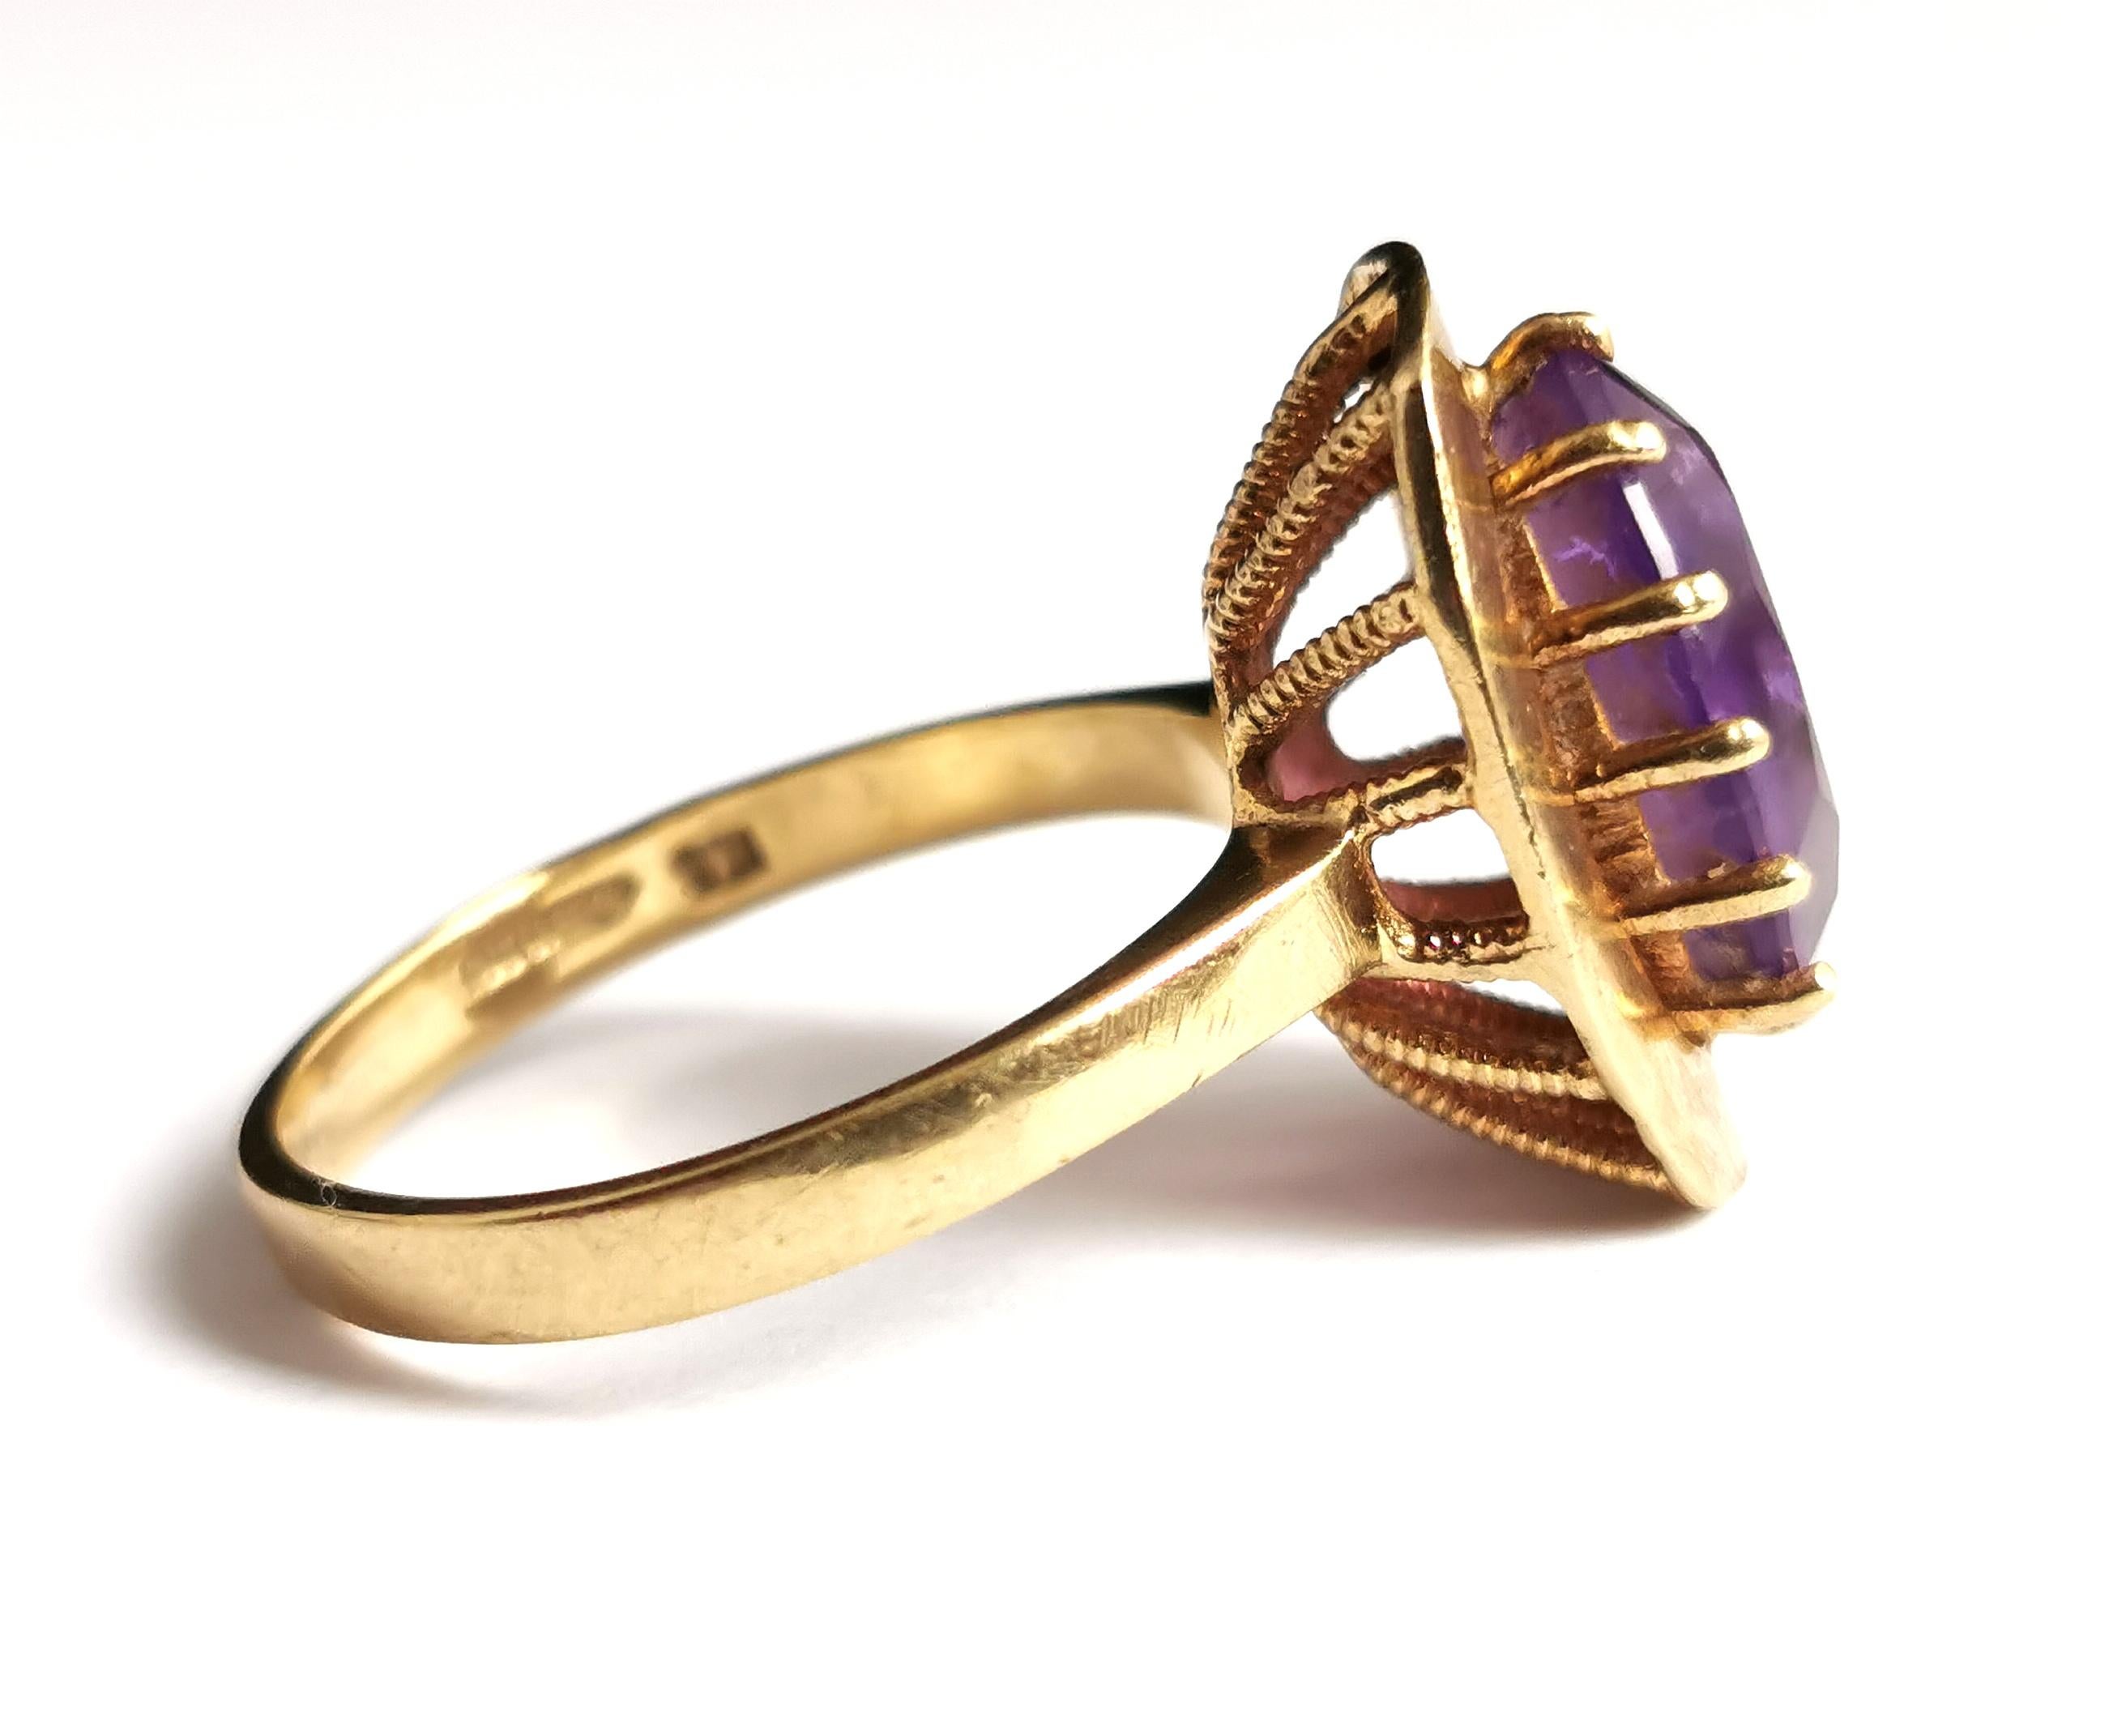 Vintage Amethyst Cocktail Ring, 9k Yellow Gold, 1970s 6